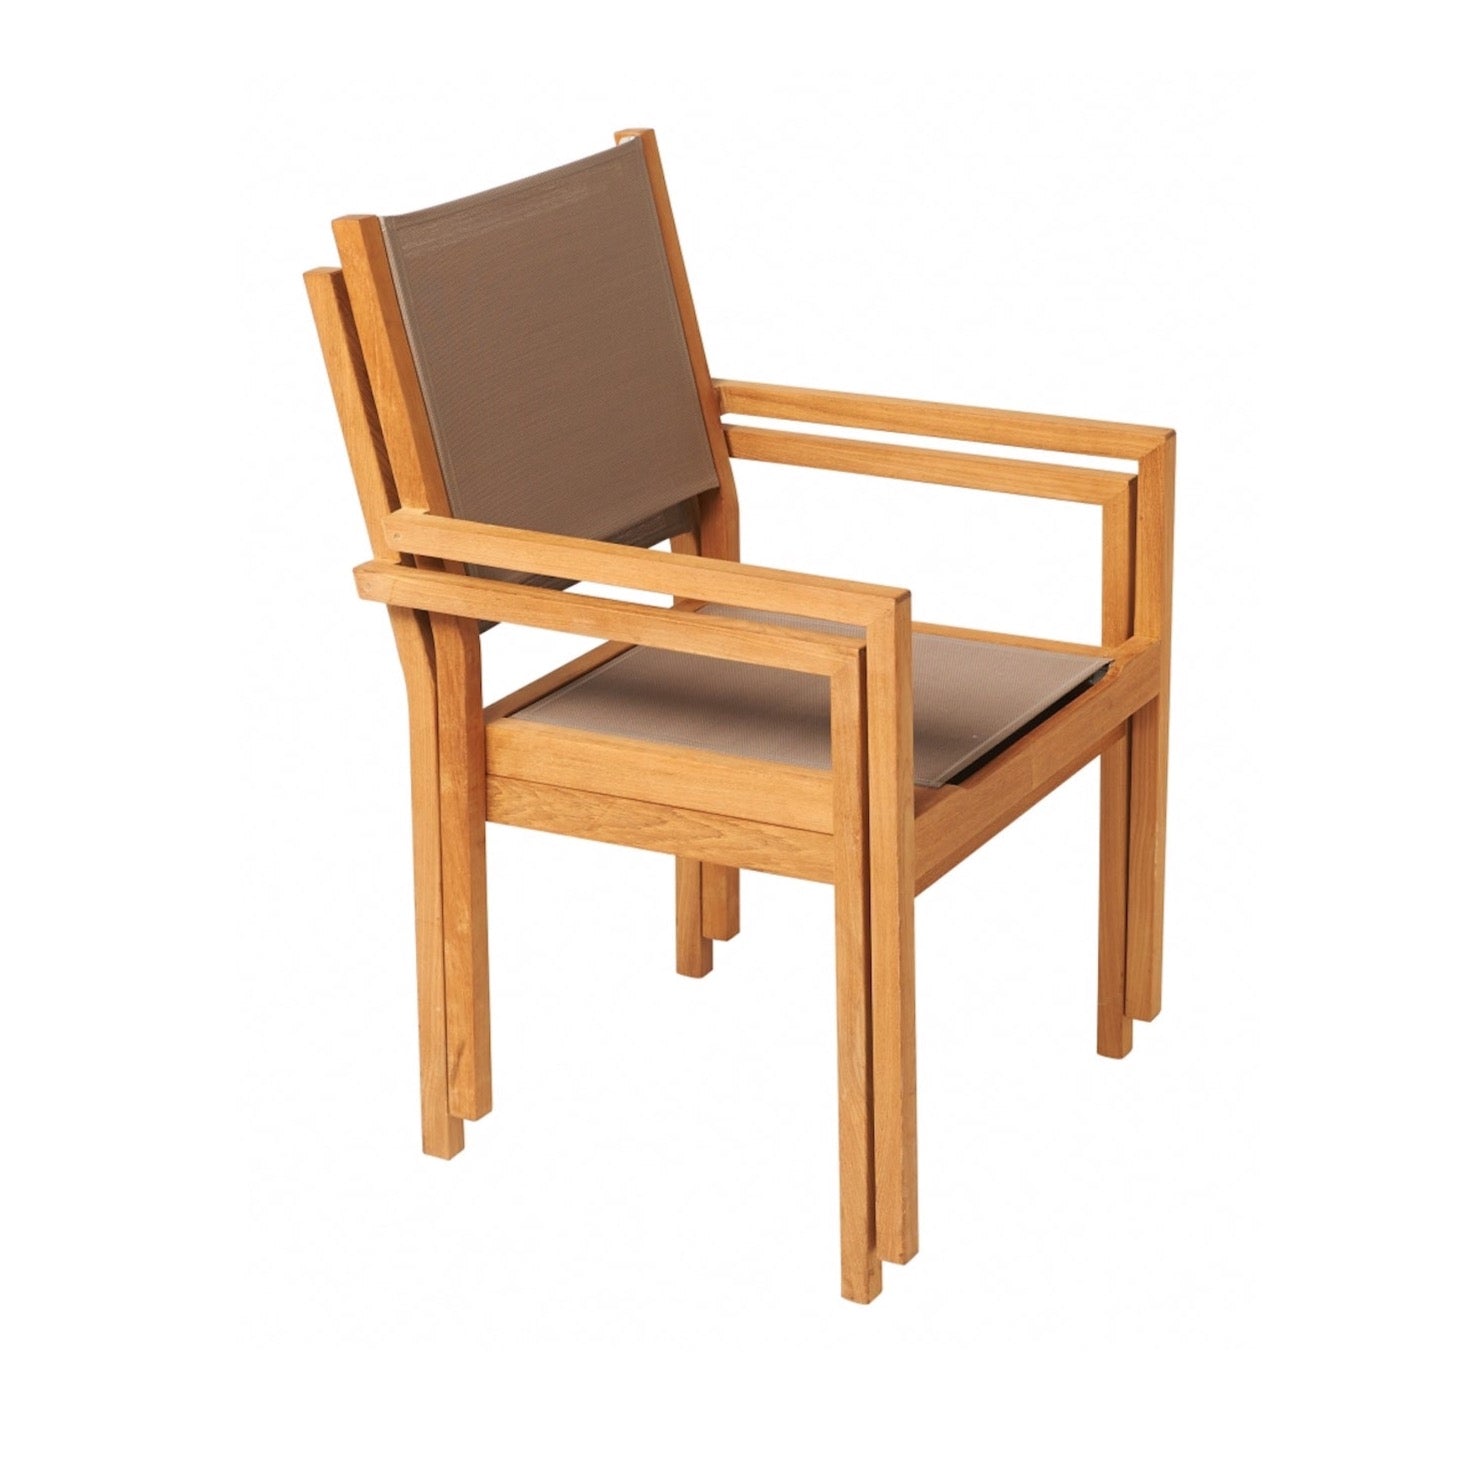 Traditional teak Kate stacking chair